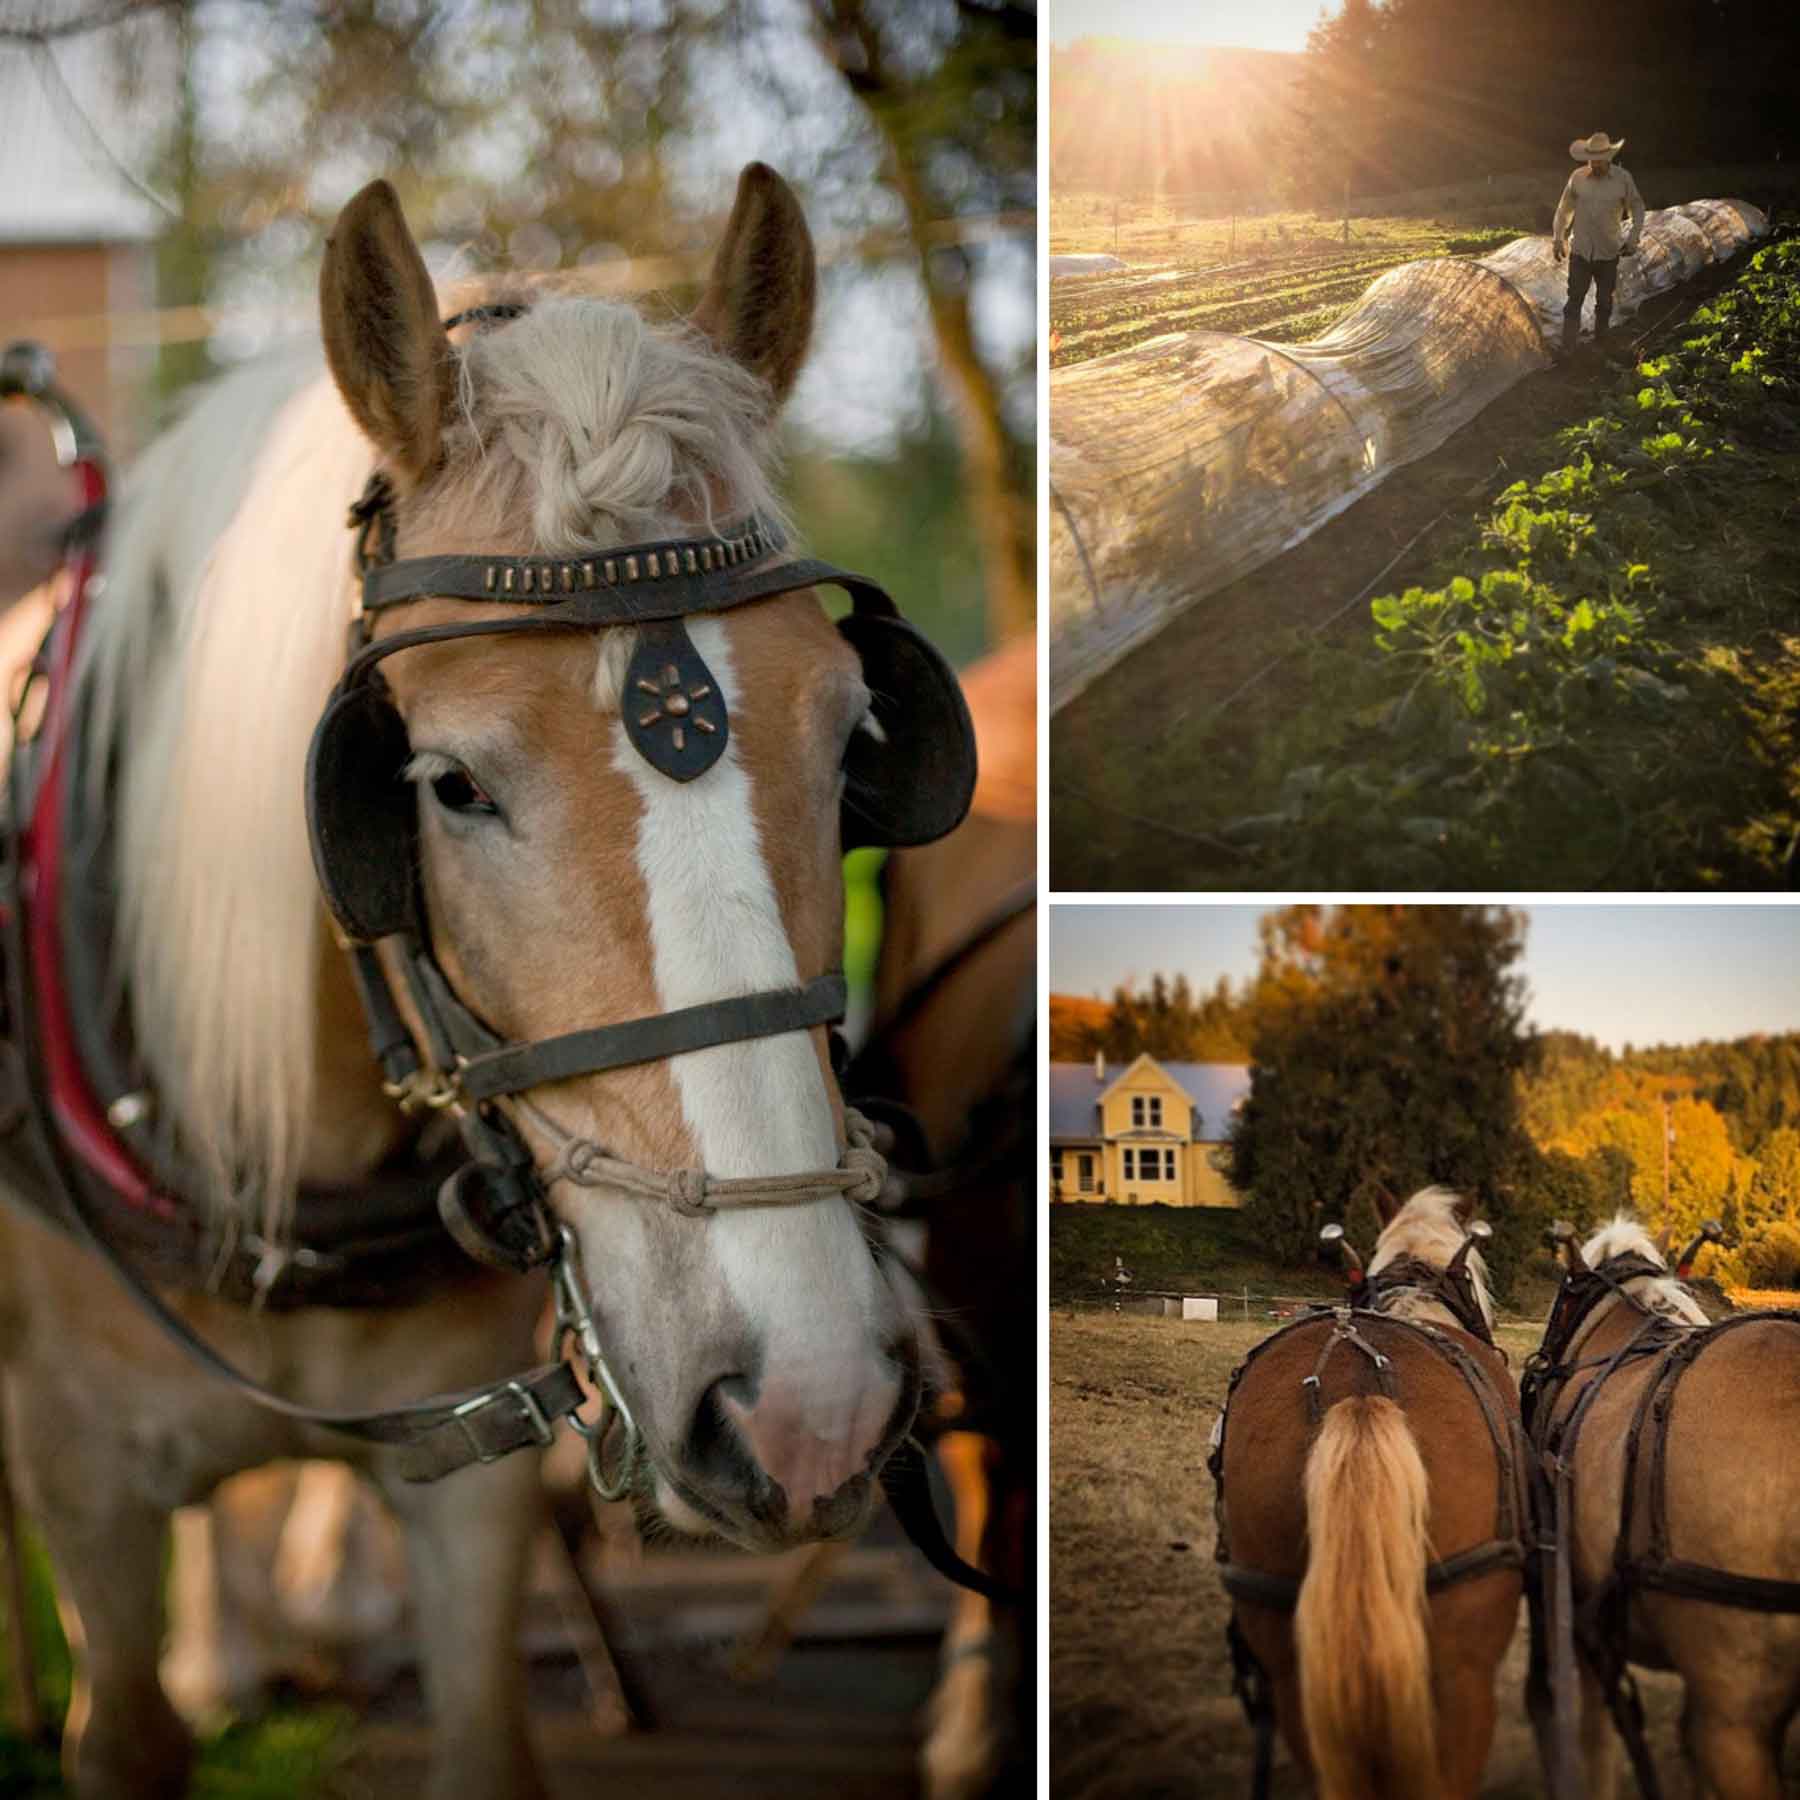  Big Table Farm Collage – Clare’s Draft Horses, and Brian walking through the vegetable garden. 